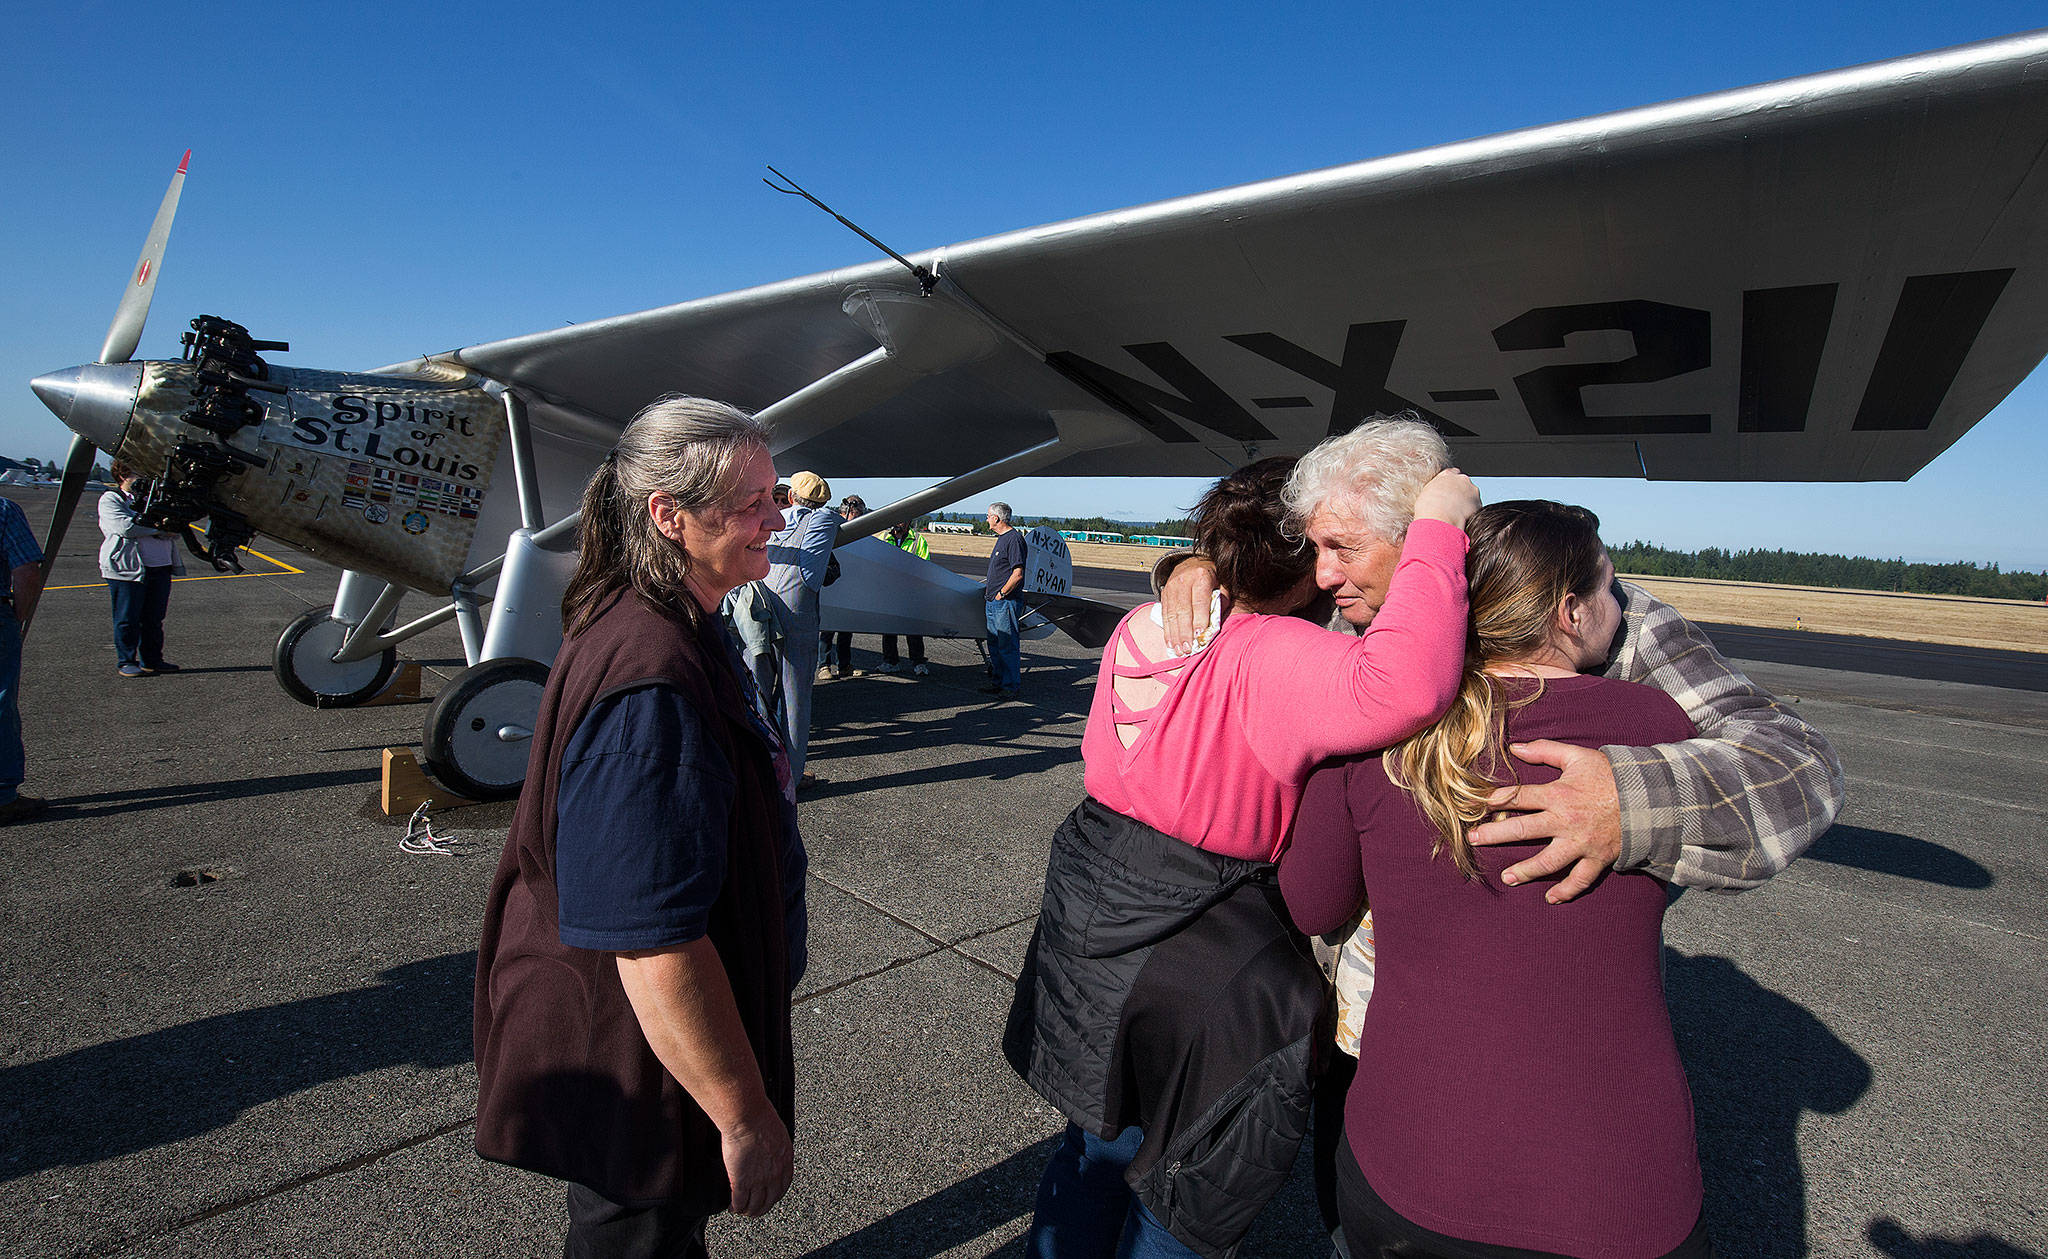 Andy Bronson/contributed photo                                As his wife, Heather, looks on, John Norman gets a hug from his daughter Amber Nelson and granddaughter Ashlee Nelson (right) after his replica of the Spirit of St. Louis flew for the first time from Arlington Municipal Airport on July 28.